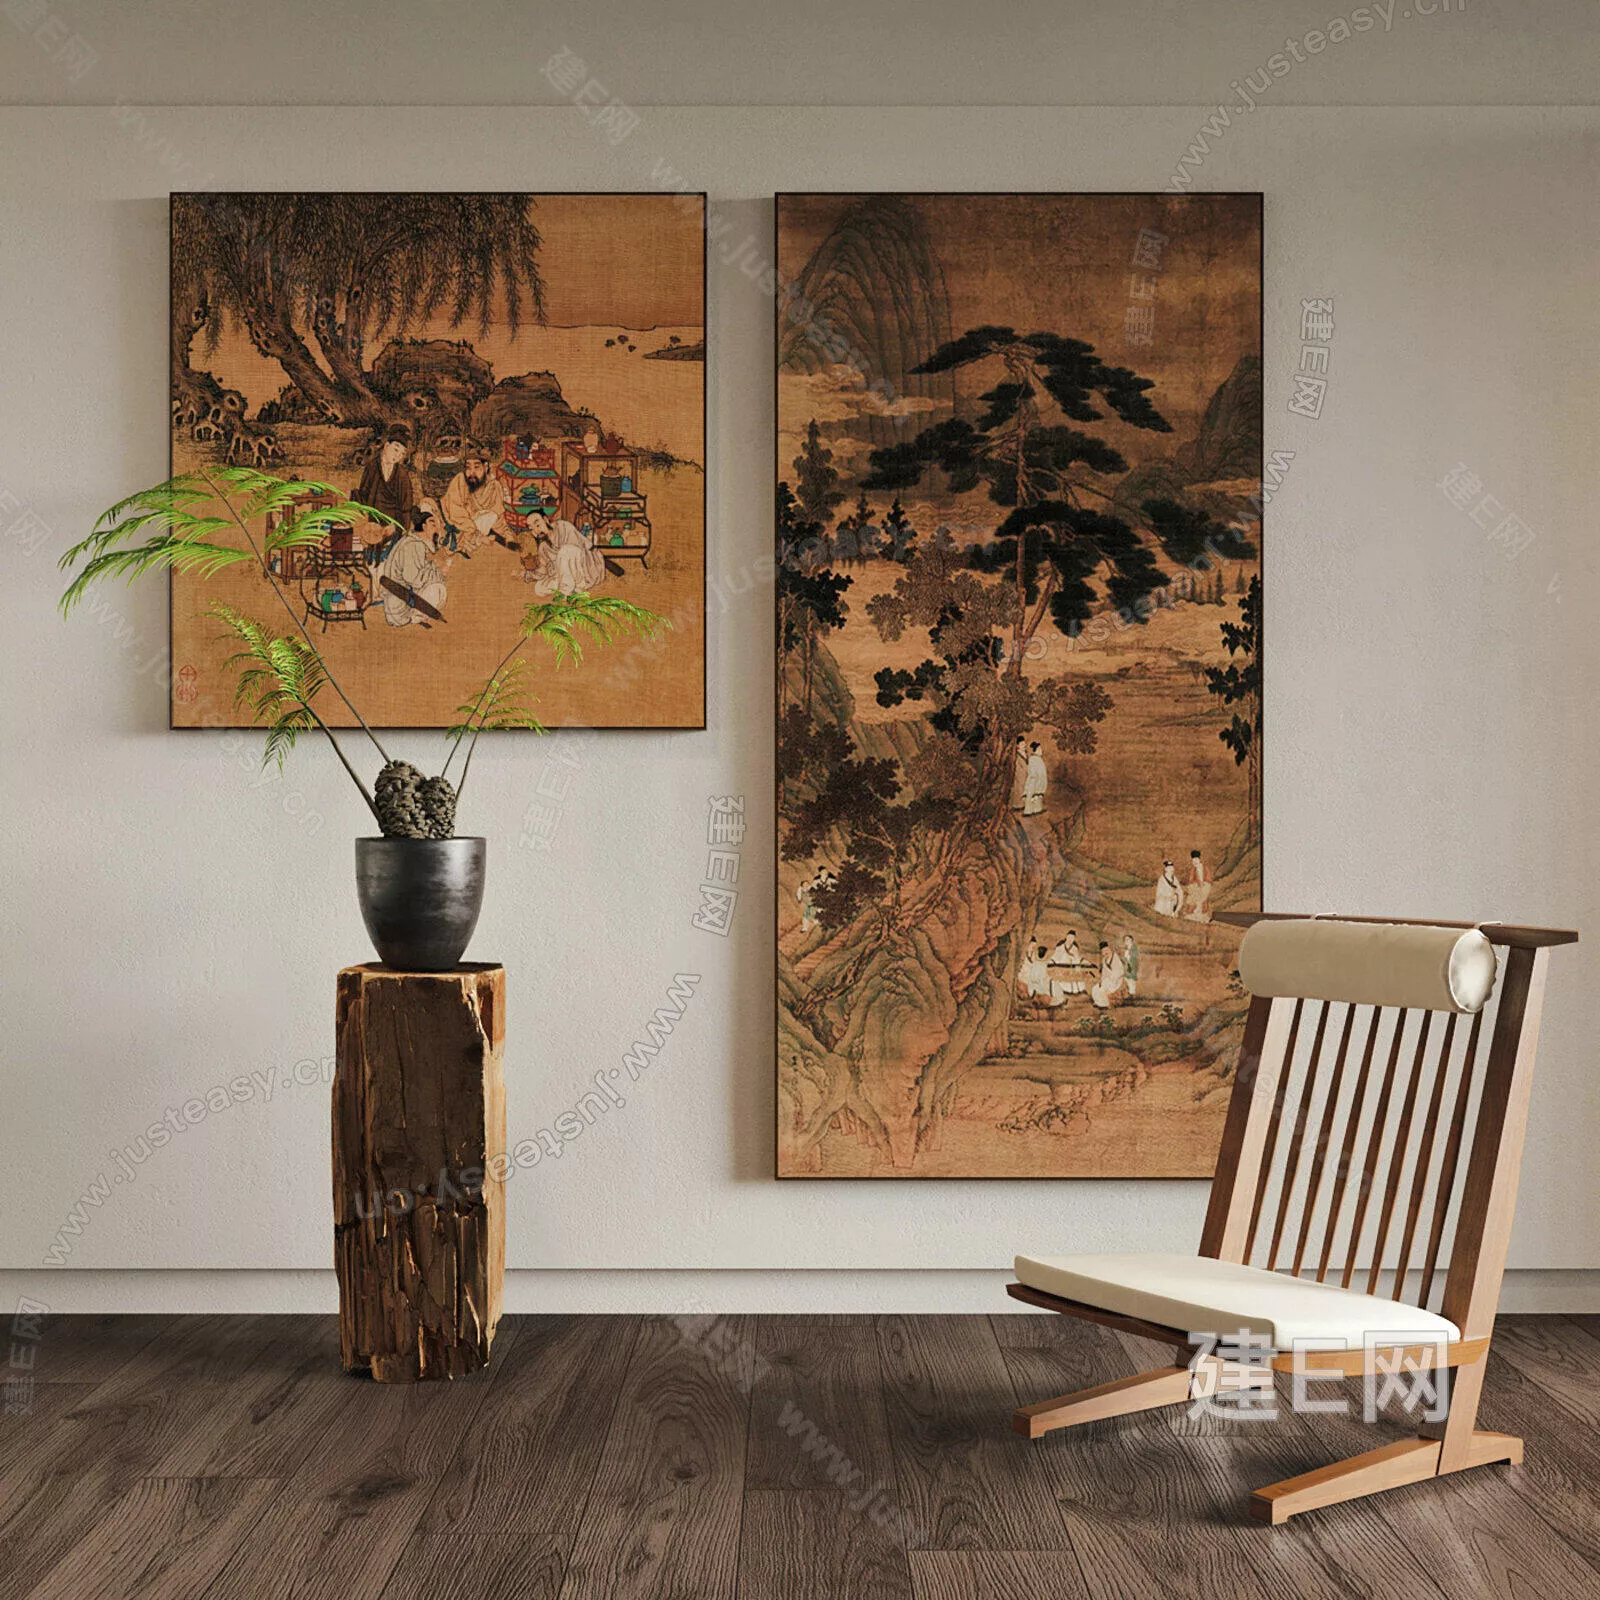 CHINESE HANGING PICTURE - SKETCHUP 3D MODEL - ENSCAPE - 114052470